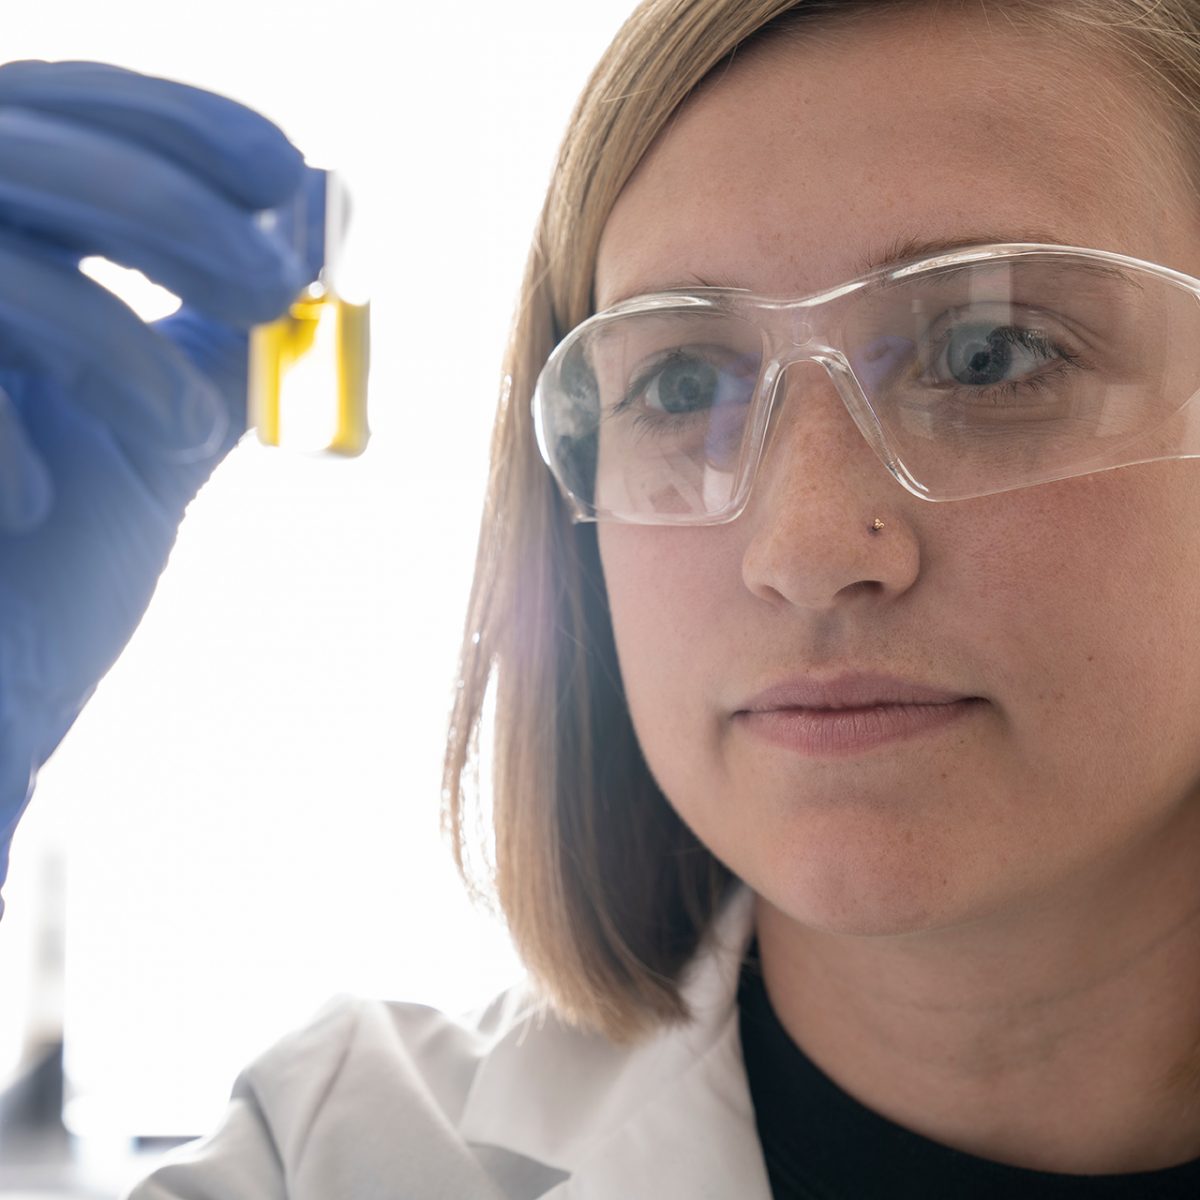 Female scientist looks at vial of a yellow liquid